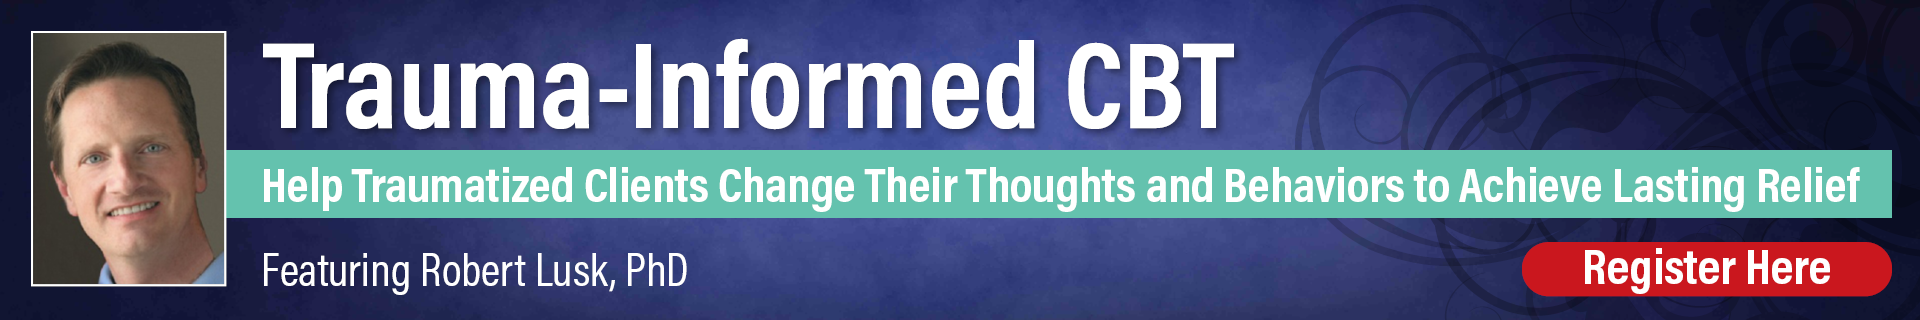 Trauma-Informed CBT: Help Traumatized Clients Change Their Thoughts and Behaviors to Achieve Lasting Relief